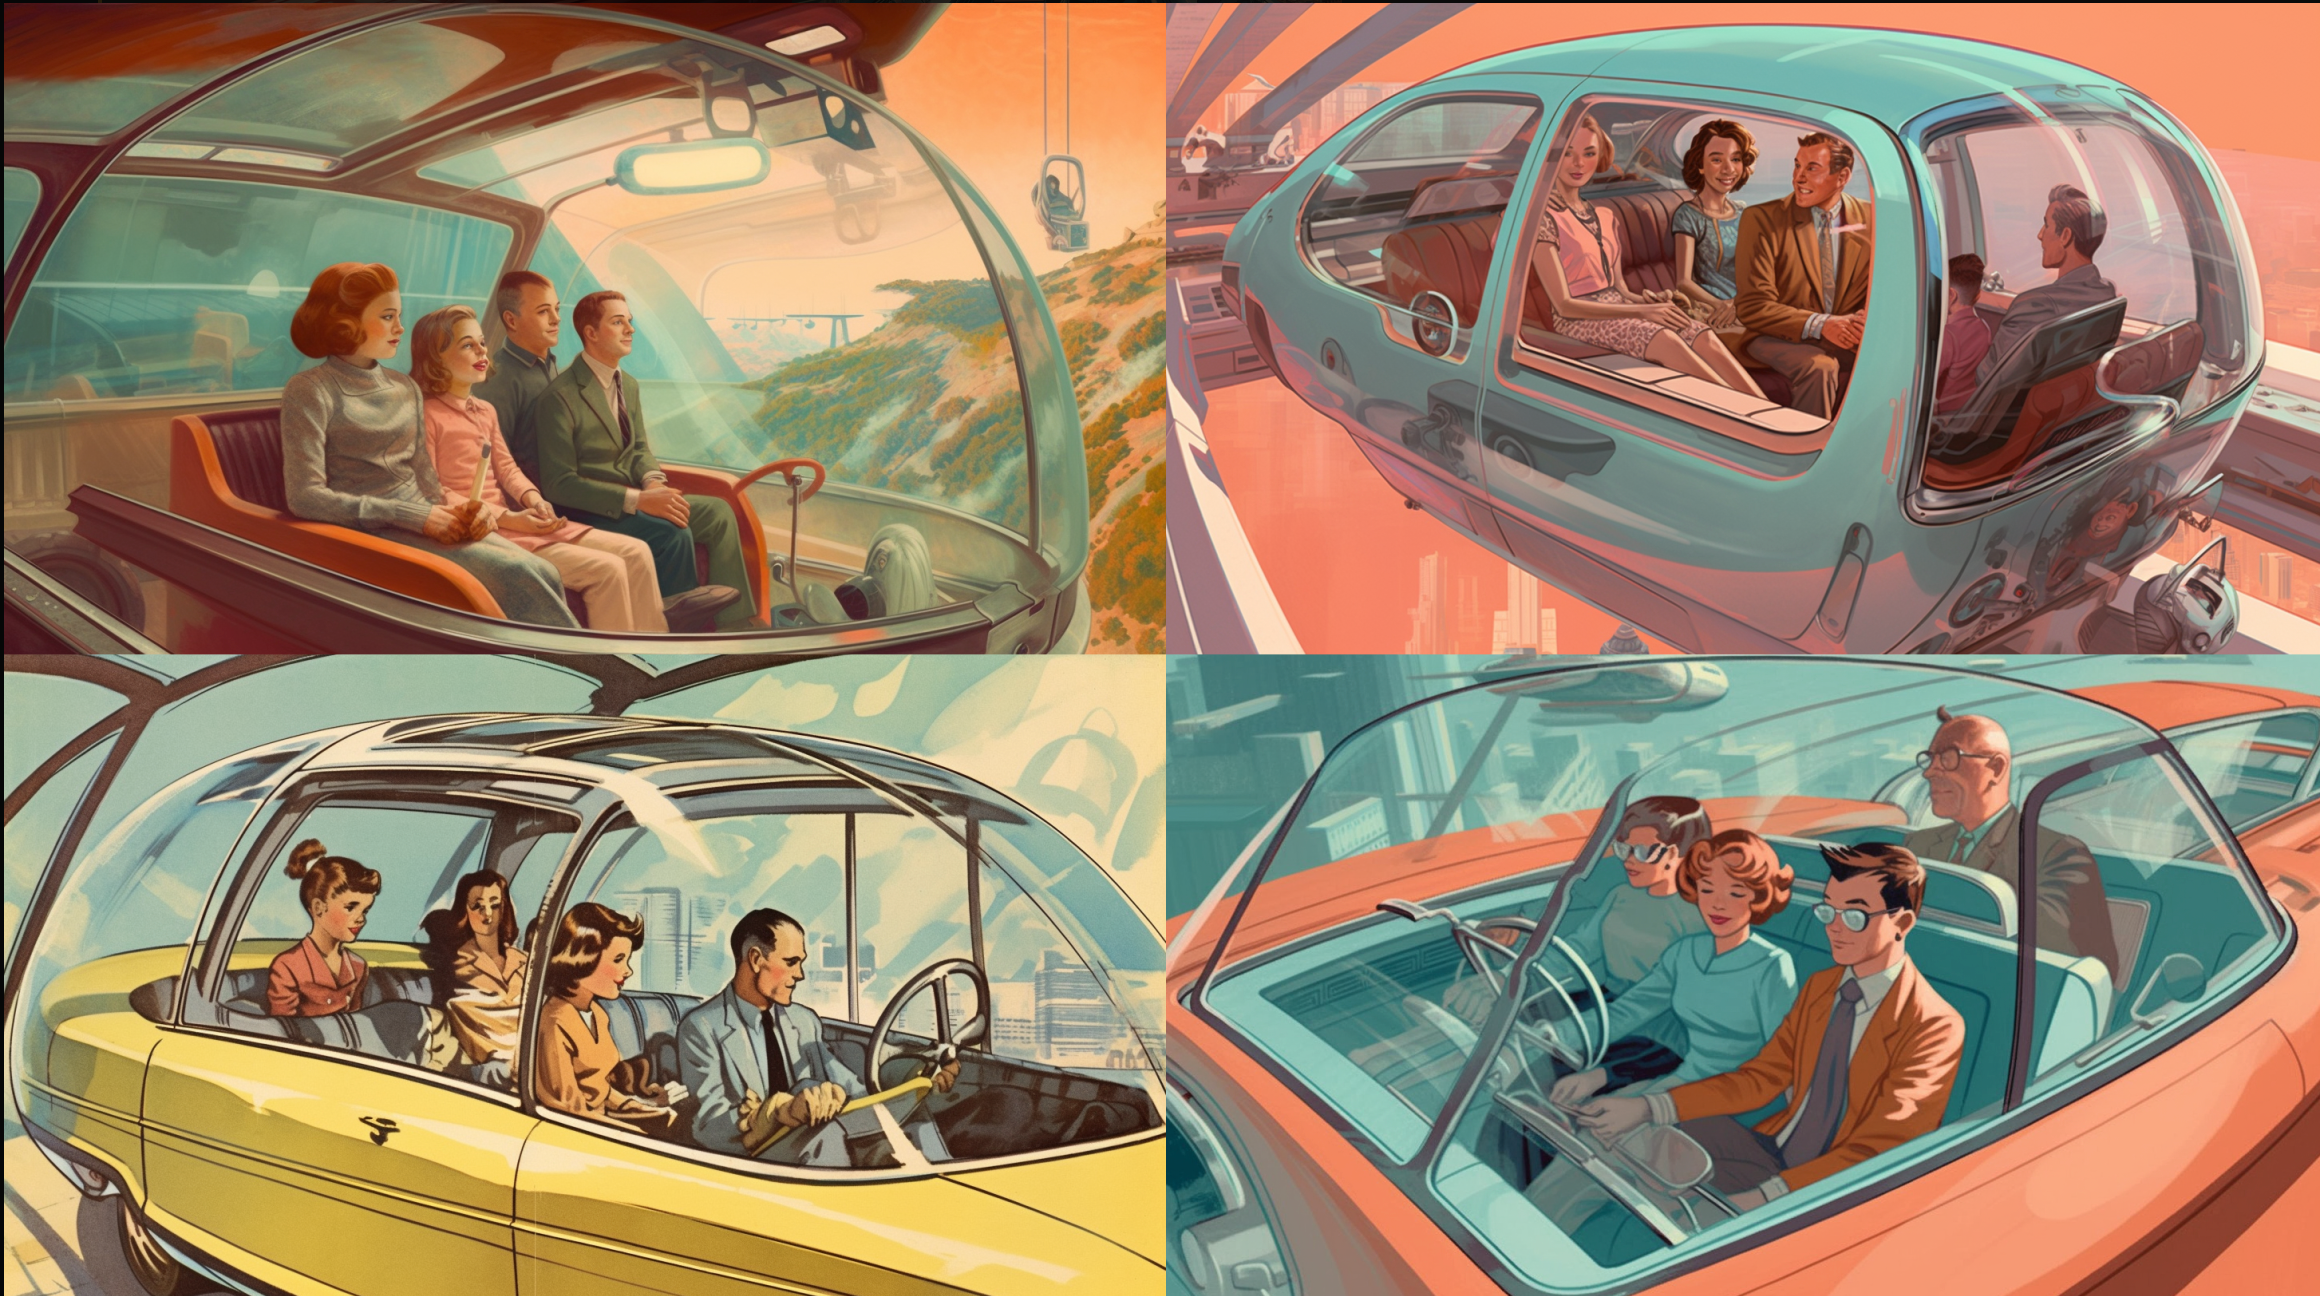 A captivating retrofuturistic illustration inspired by Arthur Radebaugh's visionary concept of self-driven cars, featuring a happy family of four - a couple and their two children - immersed in a game as they enjoy a ride in their autonomous vehicle. The scene is captured from a high bird's-eye perspective, allowing the viewer to peer through the car's transparent glass roof and observe the family's joyful interaction. --ar 16:9 